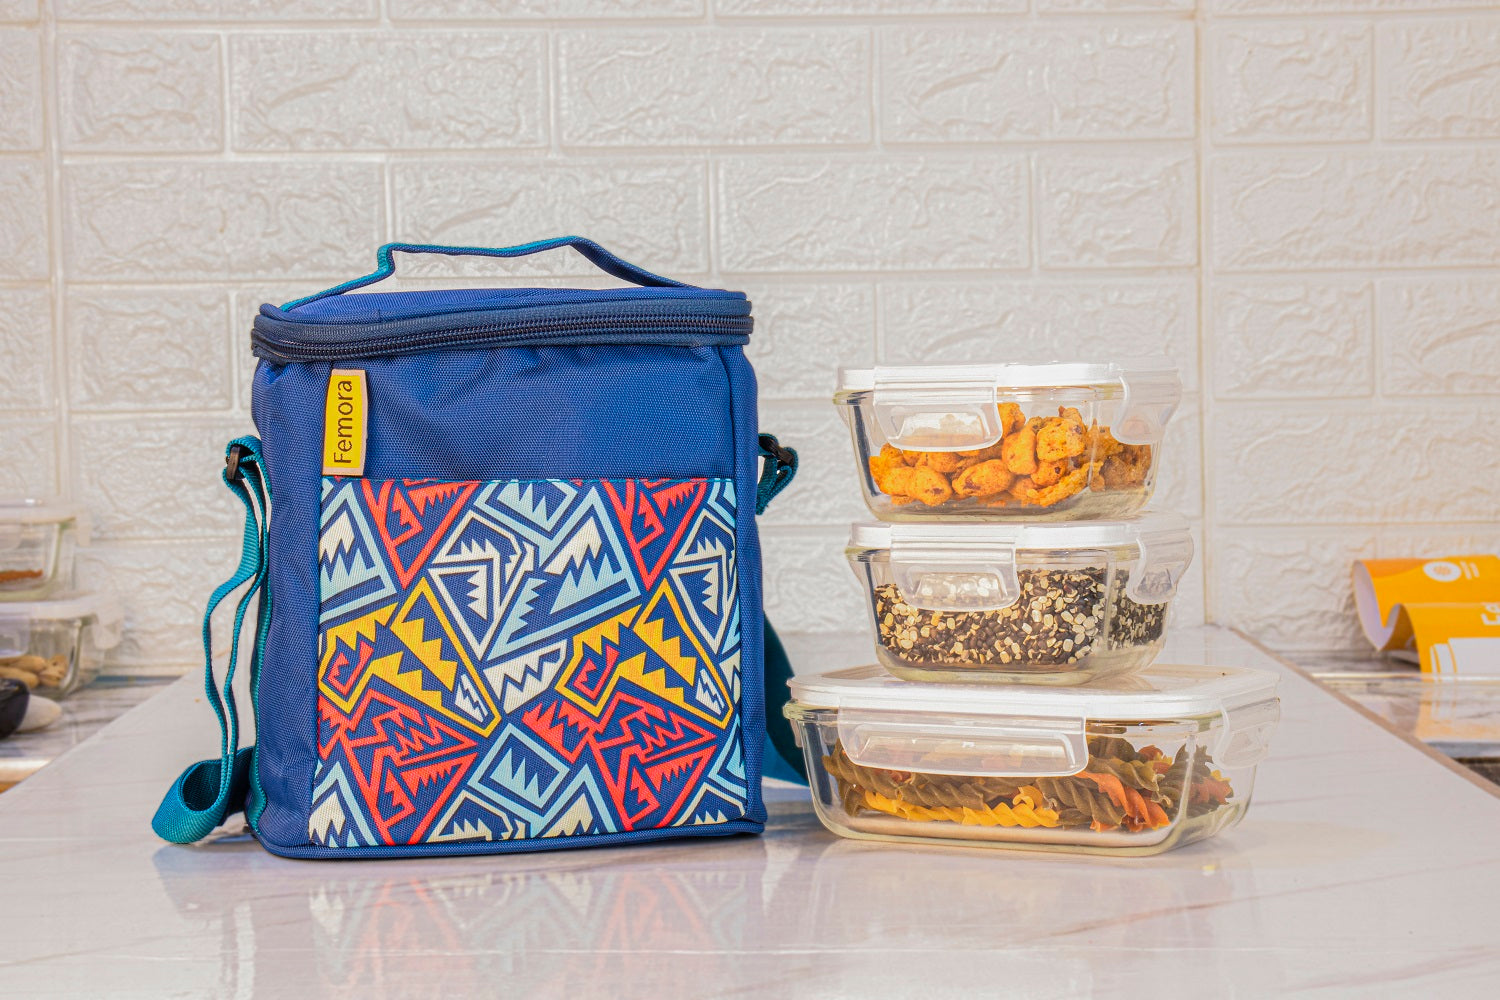 Blue, Lunch Box for Office, Square-300 ml, Rectangle-620 ml